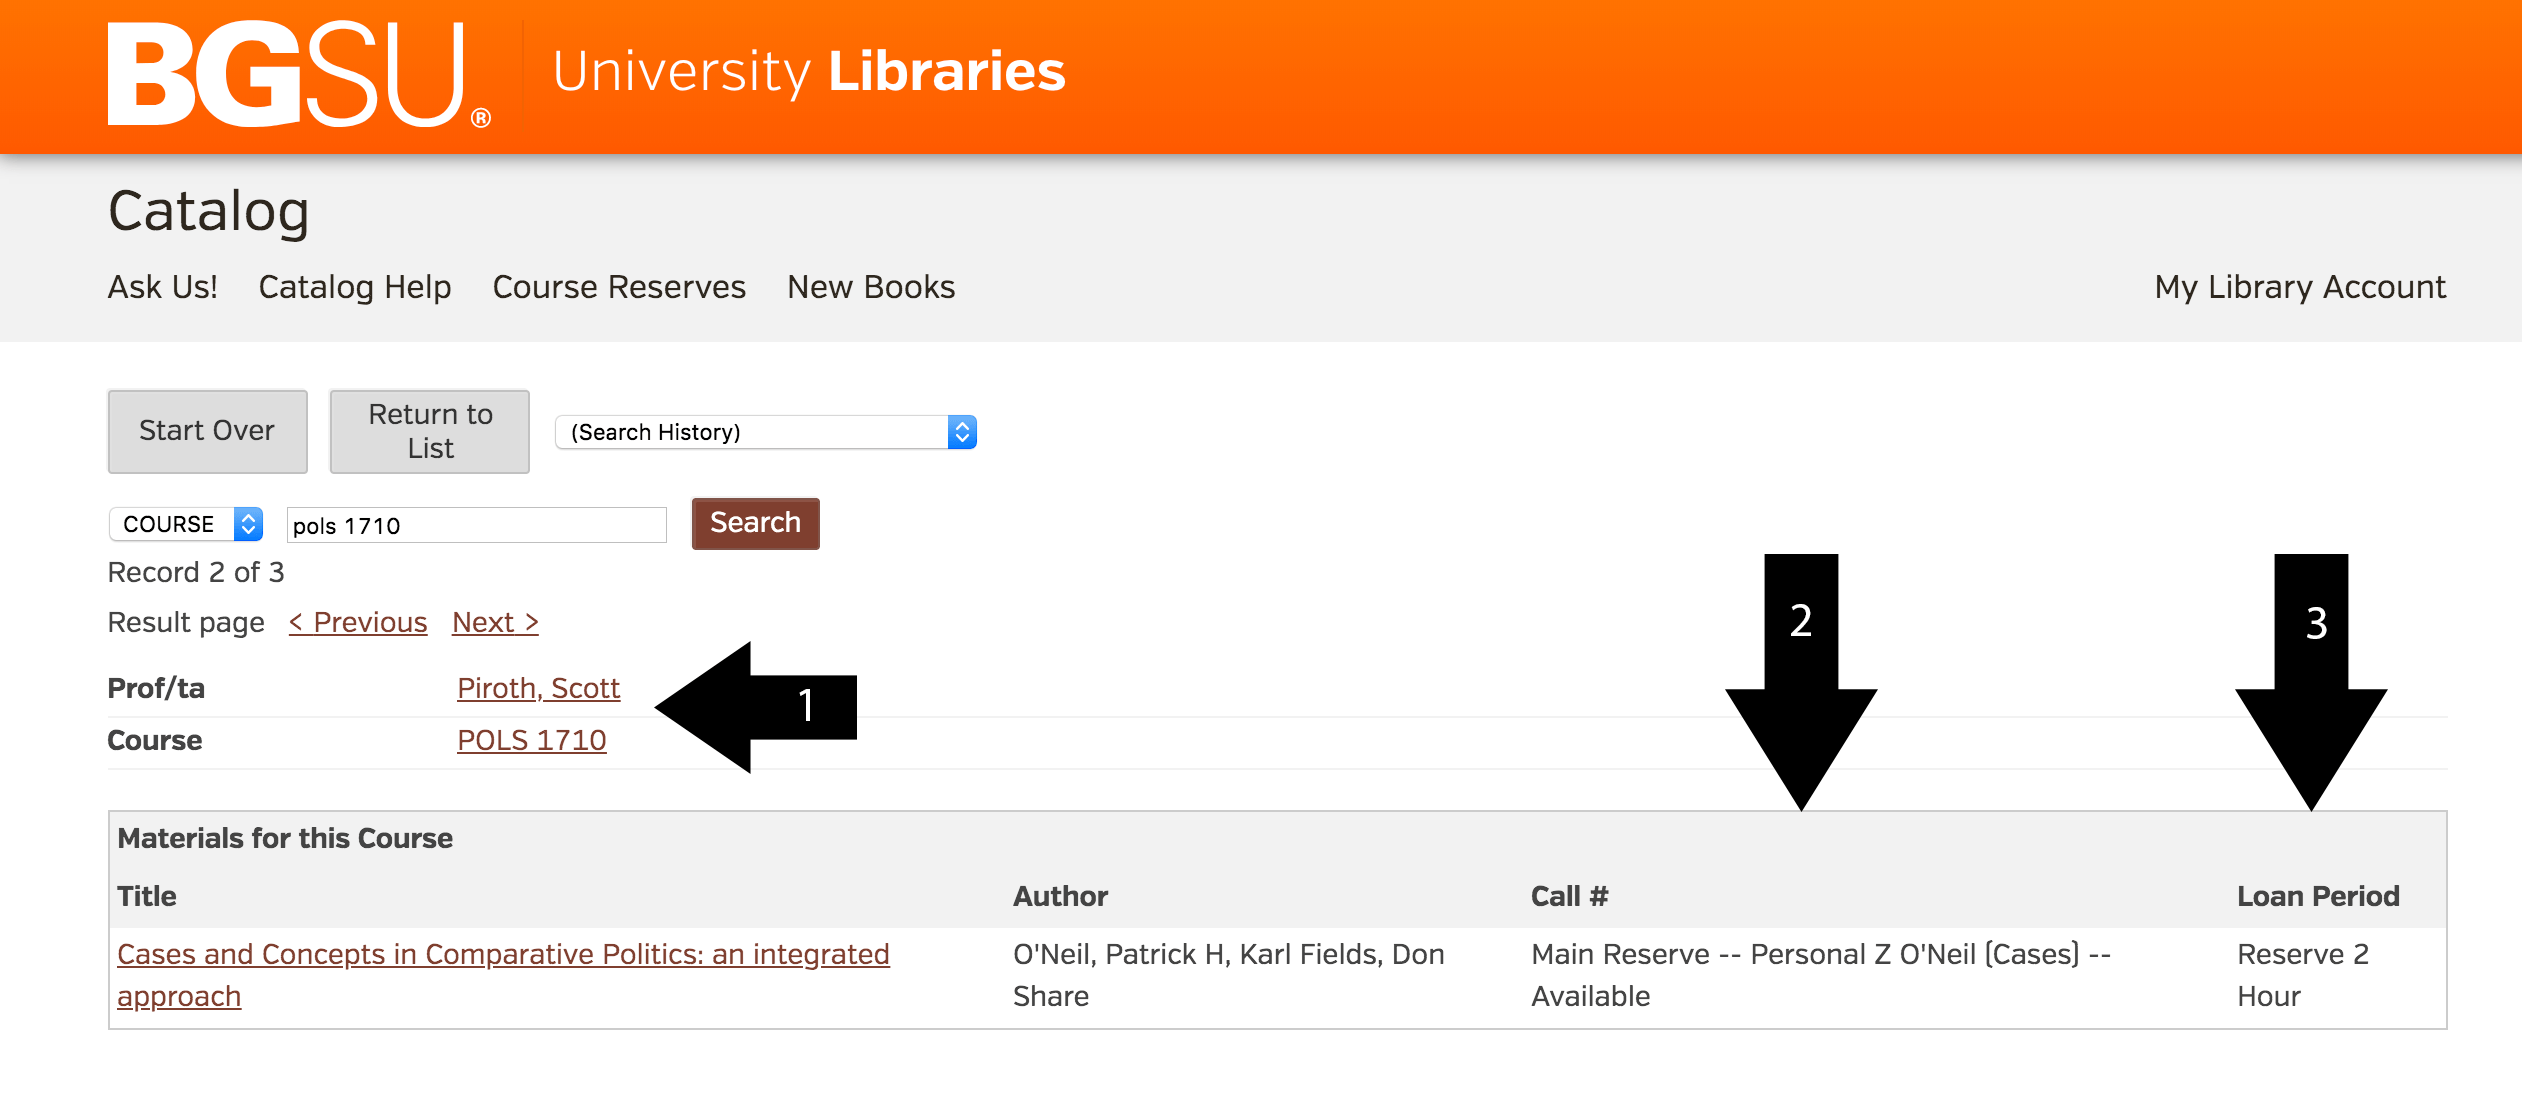 Arrows pointing to course description, location of materials, and checkout length in the libraries catalog